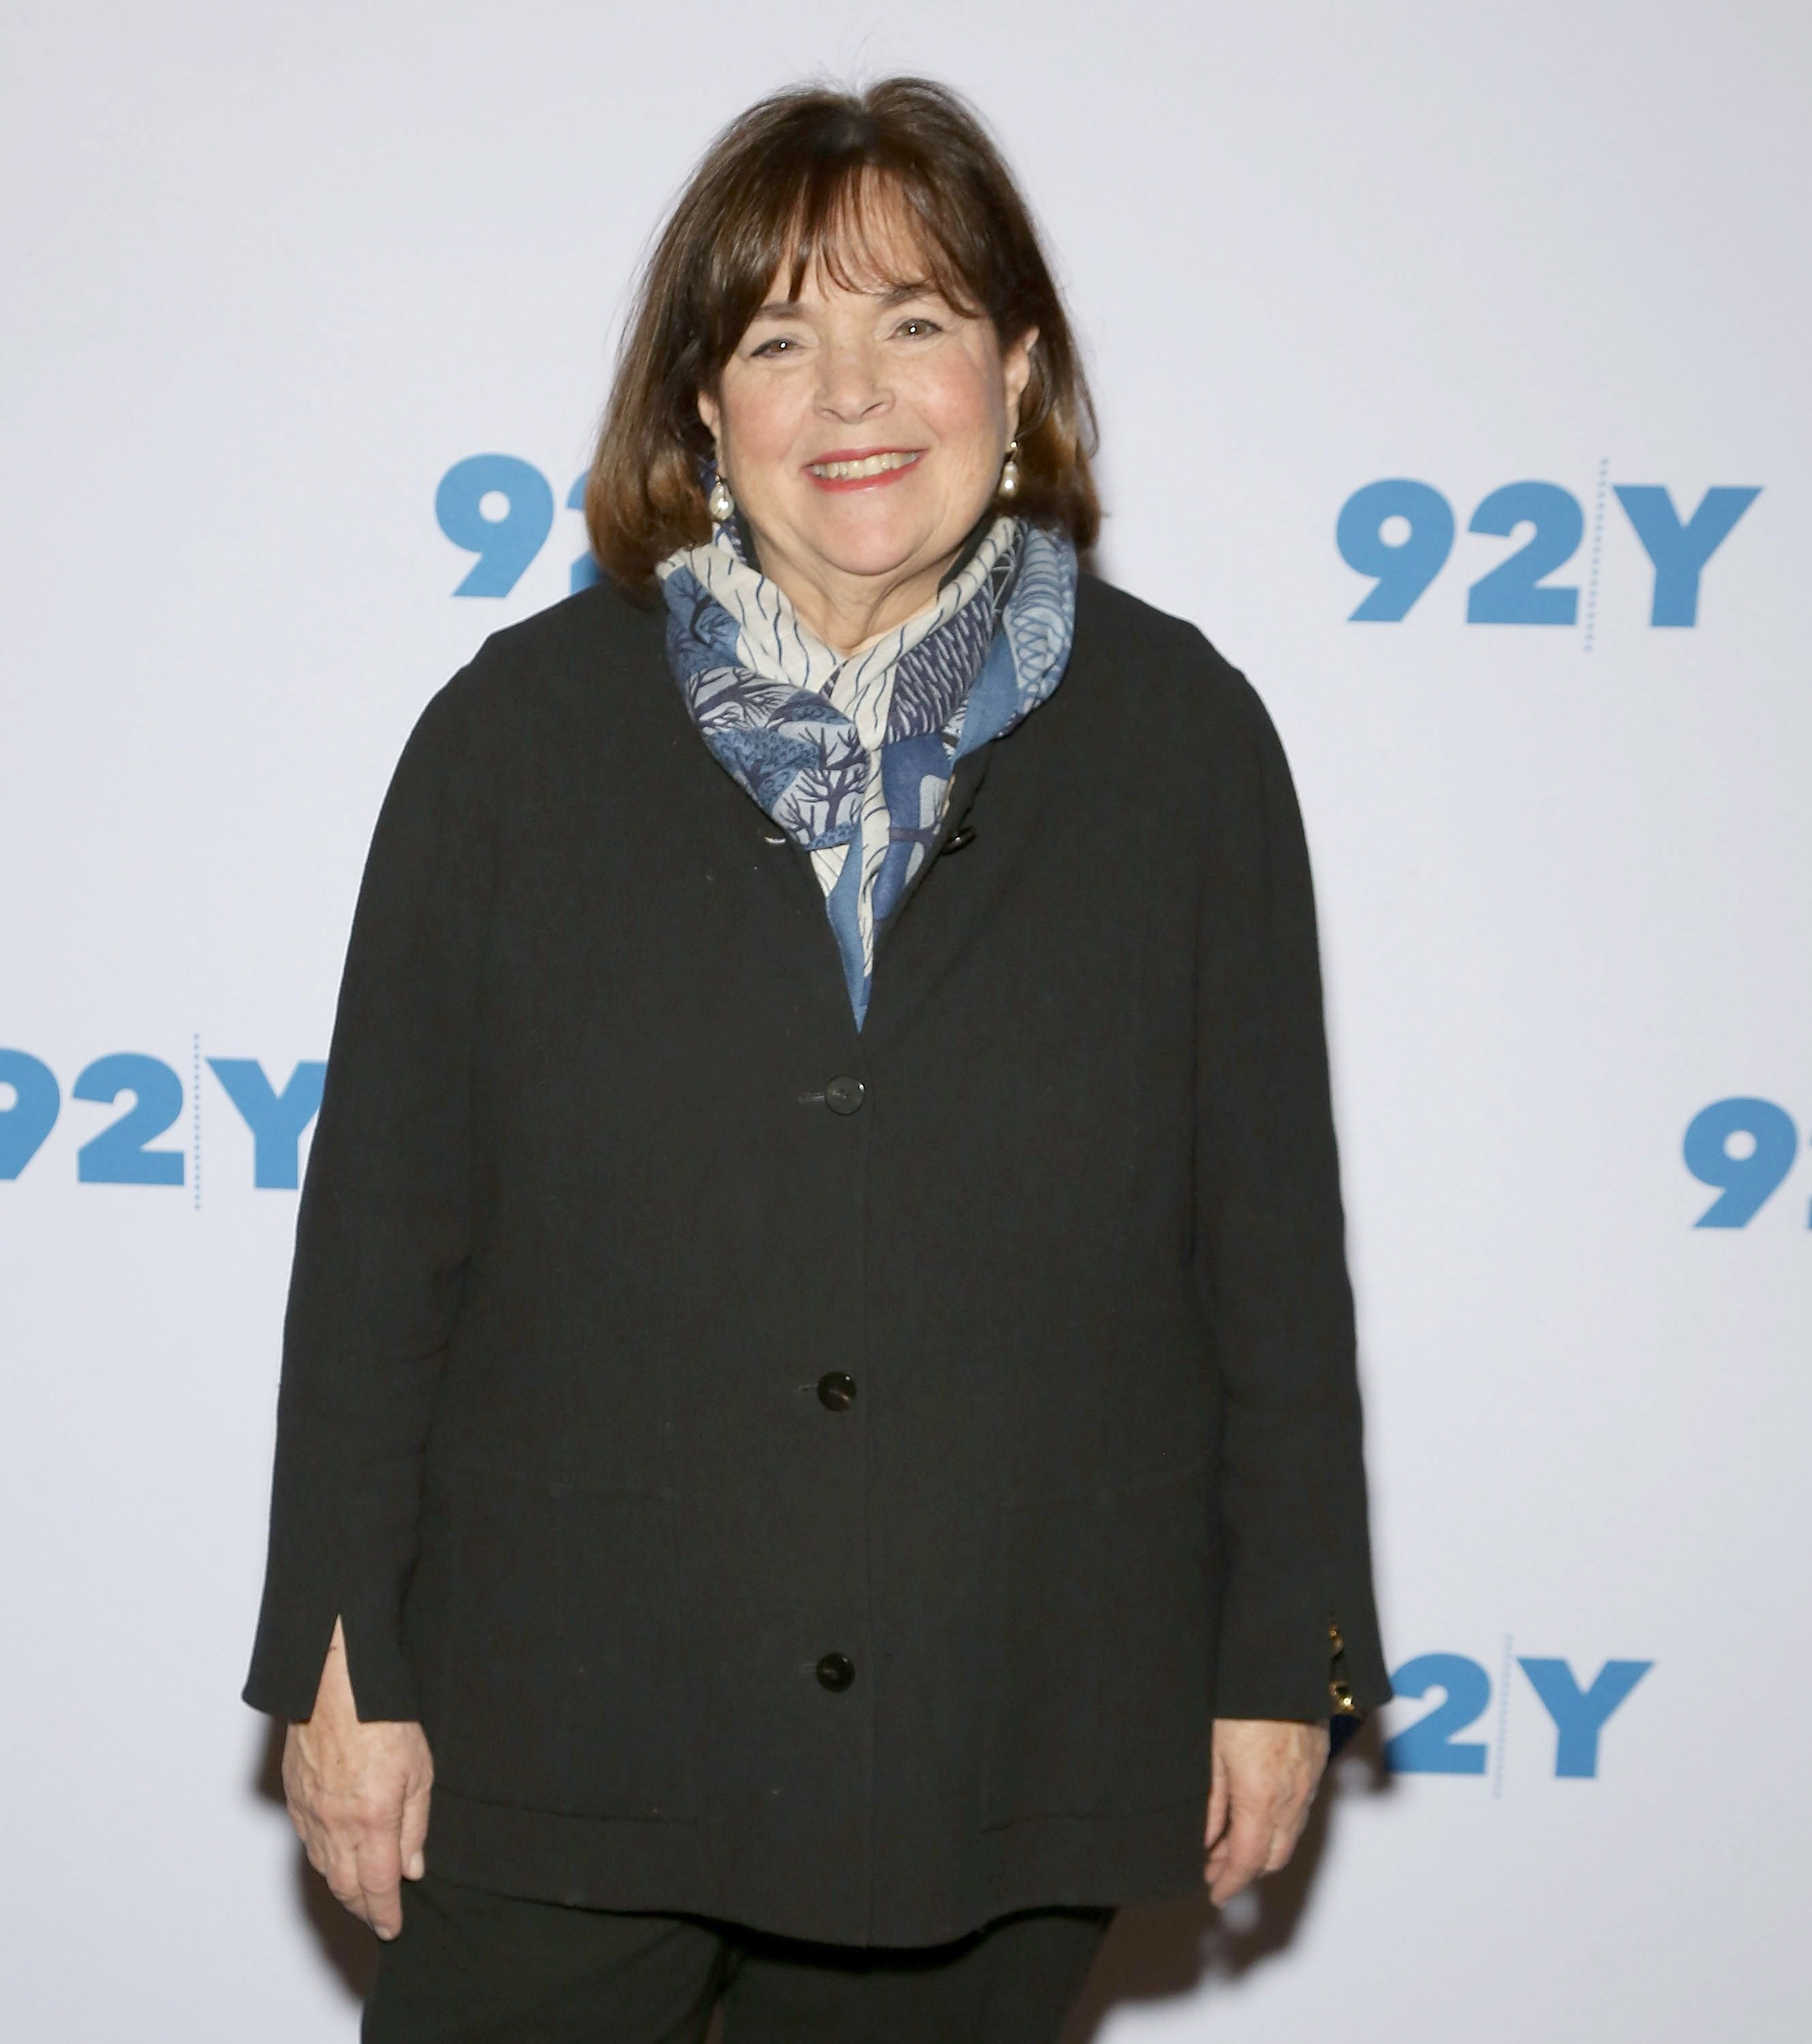 Ina Garten attends Ina Garten in Conversation with Danny Meyer at 92nd Street Y on January 31, 2017. | Photo: Getty Images